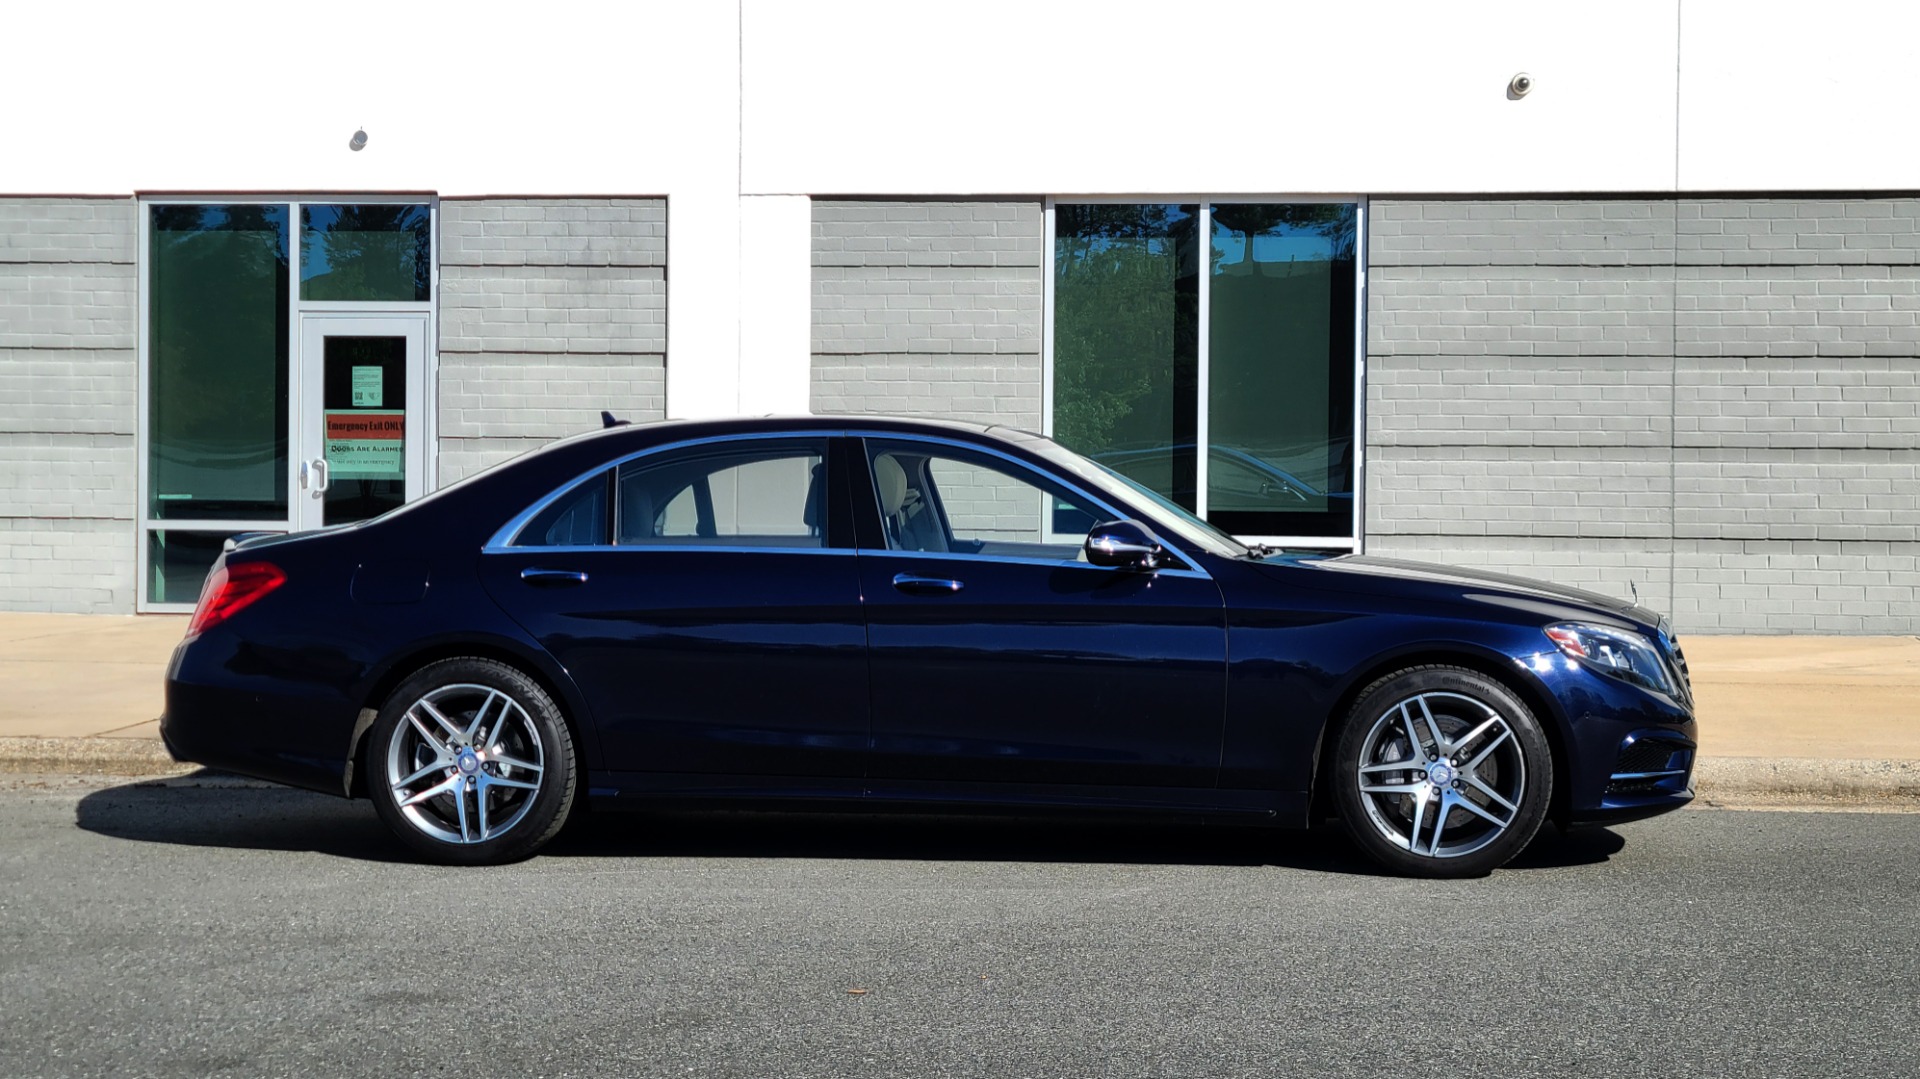 Used 2015 Mercedes-Benz S-CLASS S 550 4MATIC PREMIUM SPORT / WARMTH / DRVR ASST for sale $43,999 at Formula Imports in Charlotte NC 28227 8